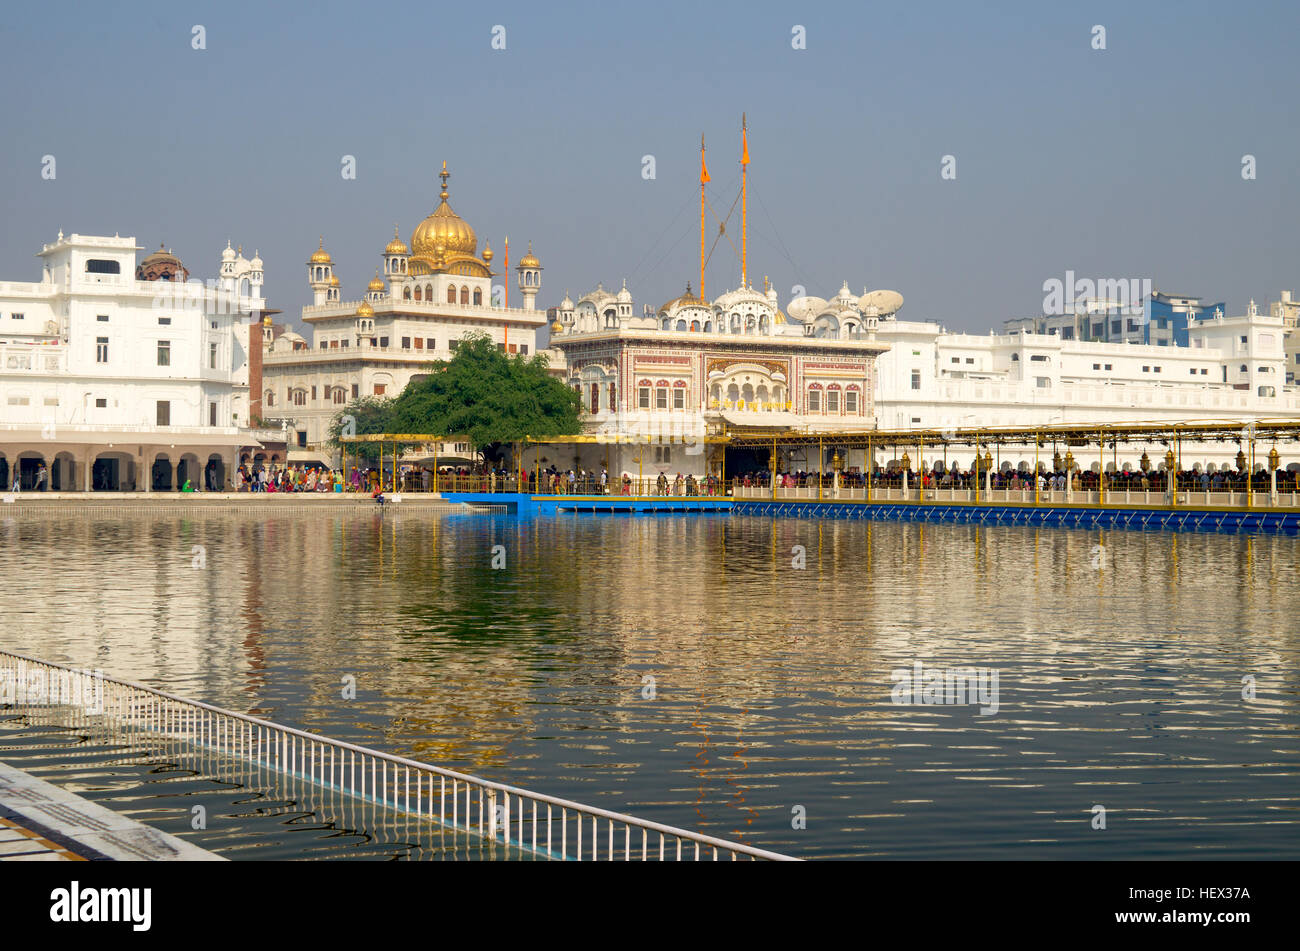 Architecture and place of interest of the city of Amritsar in India,a construction, amritsar, architecture, art, india Stock Photo